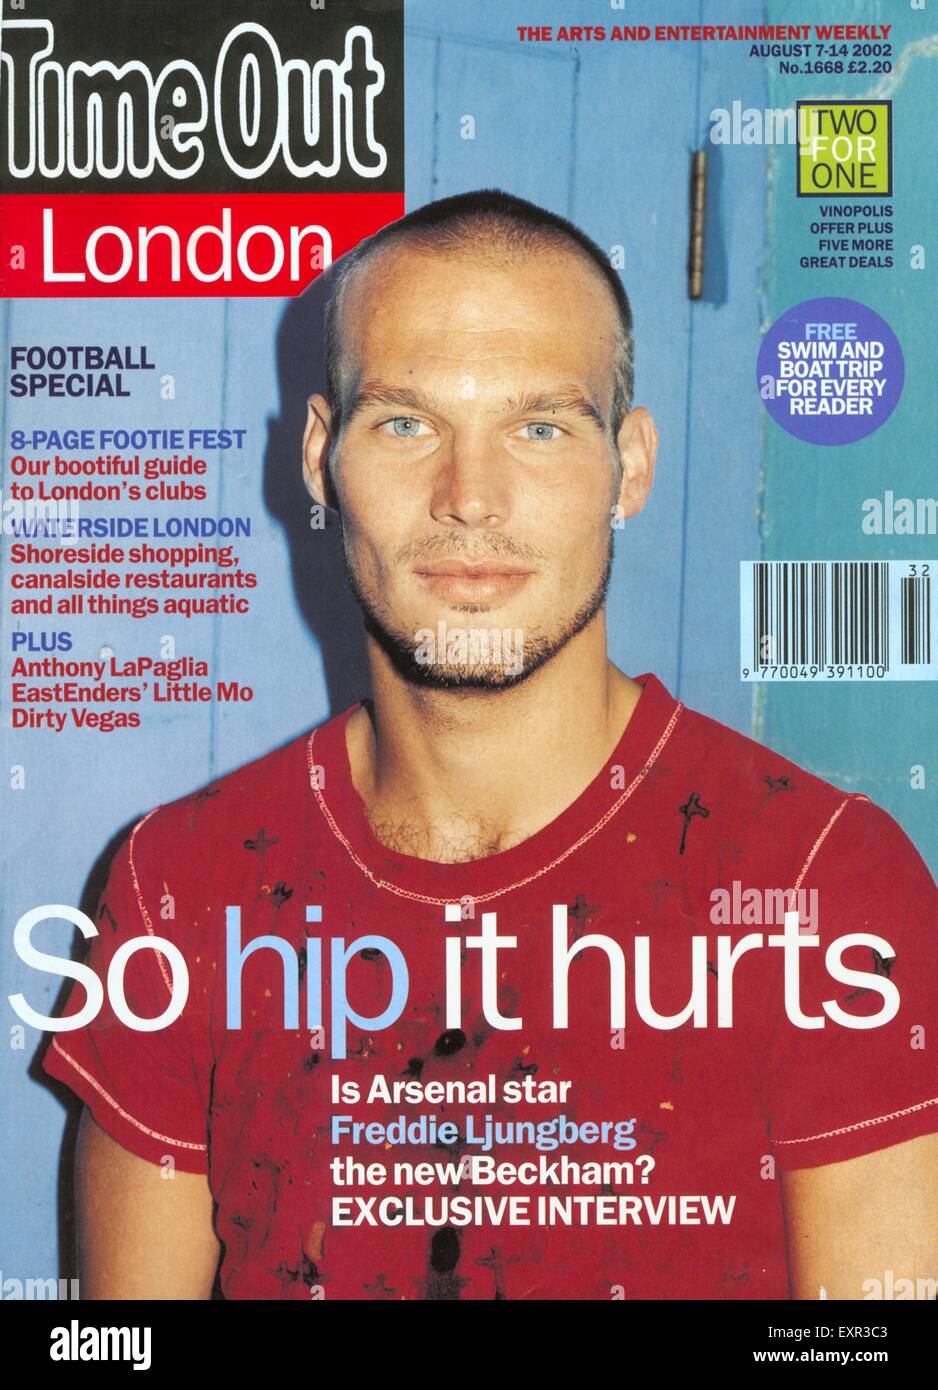 2000er Jahre UK Time Out Magazin-Cover Stockfoto